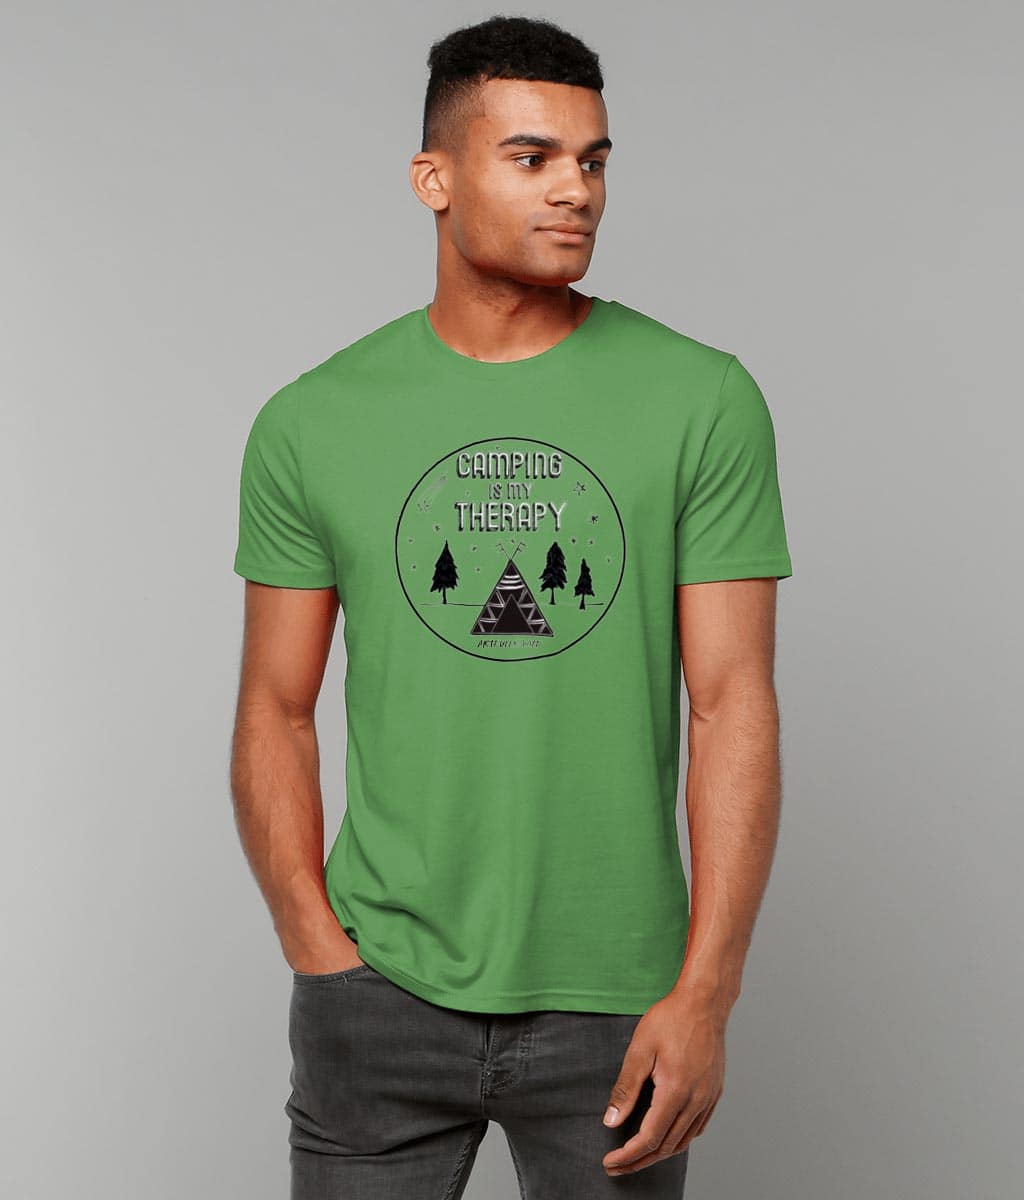 Male model wearing 'CAMPING IS MY THERAPY' Organic Unisex Green T-Shirt. Printed with eco-friendly water-based Inks. Original Design by Artfully Wild.